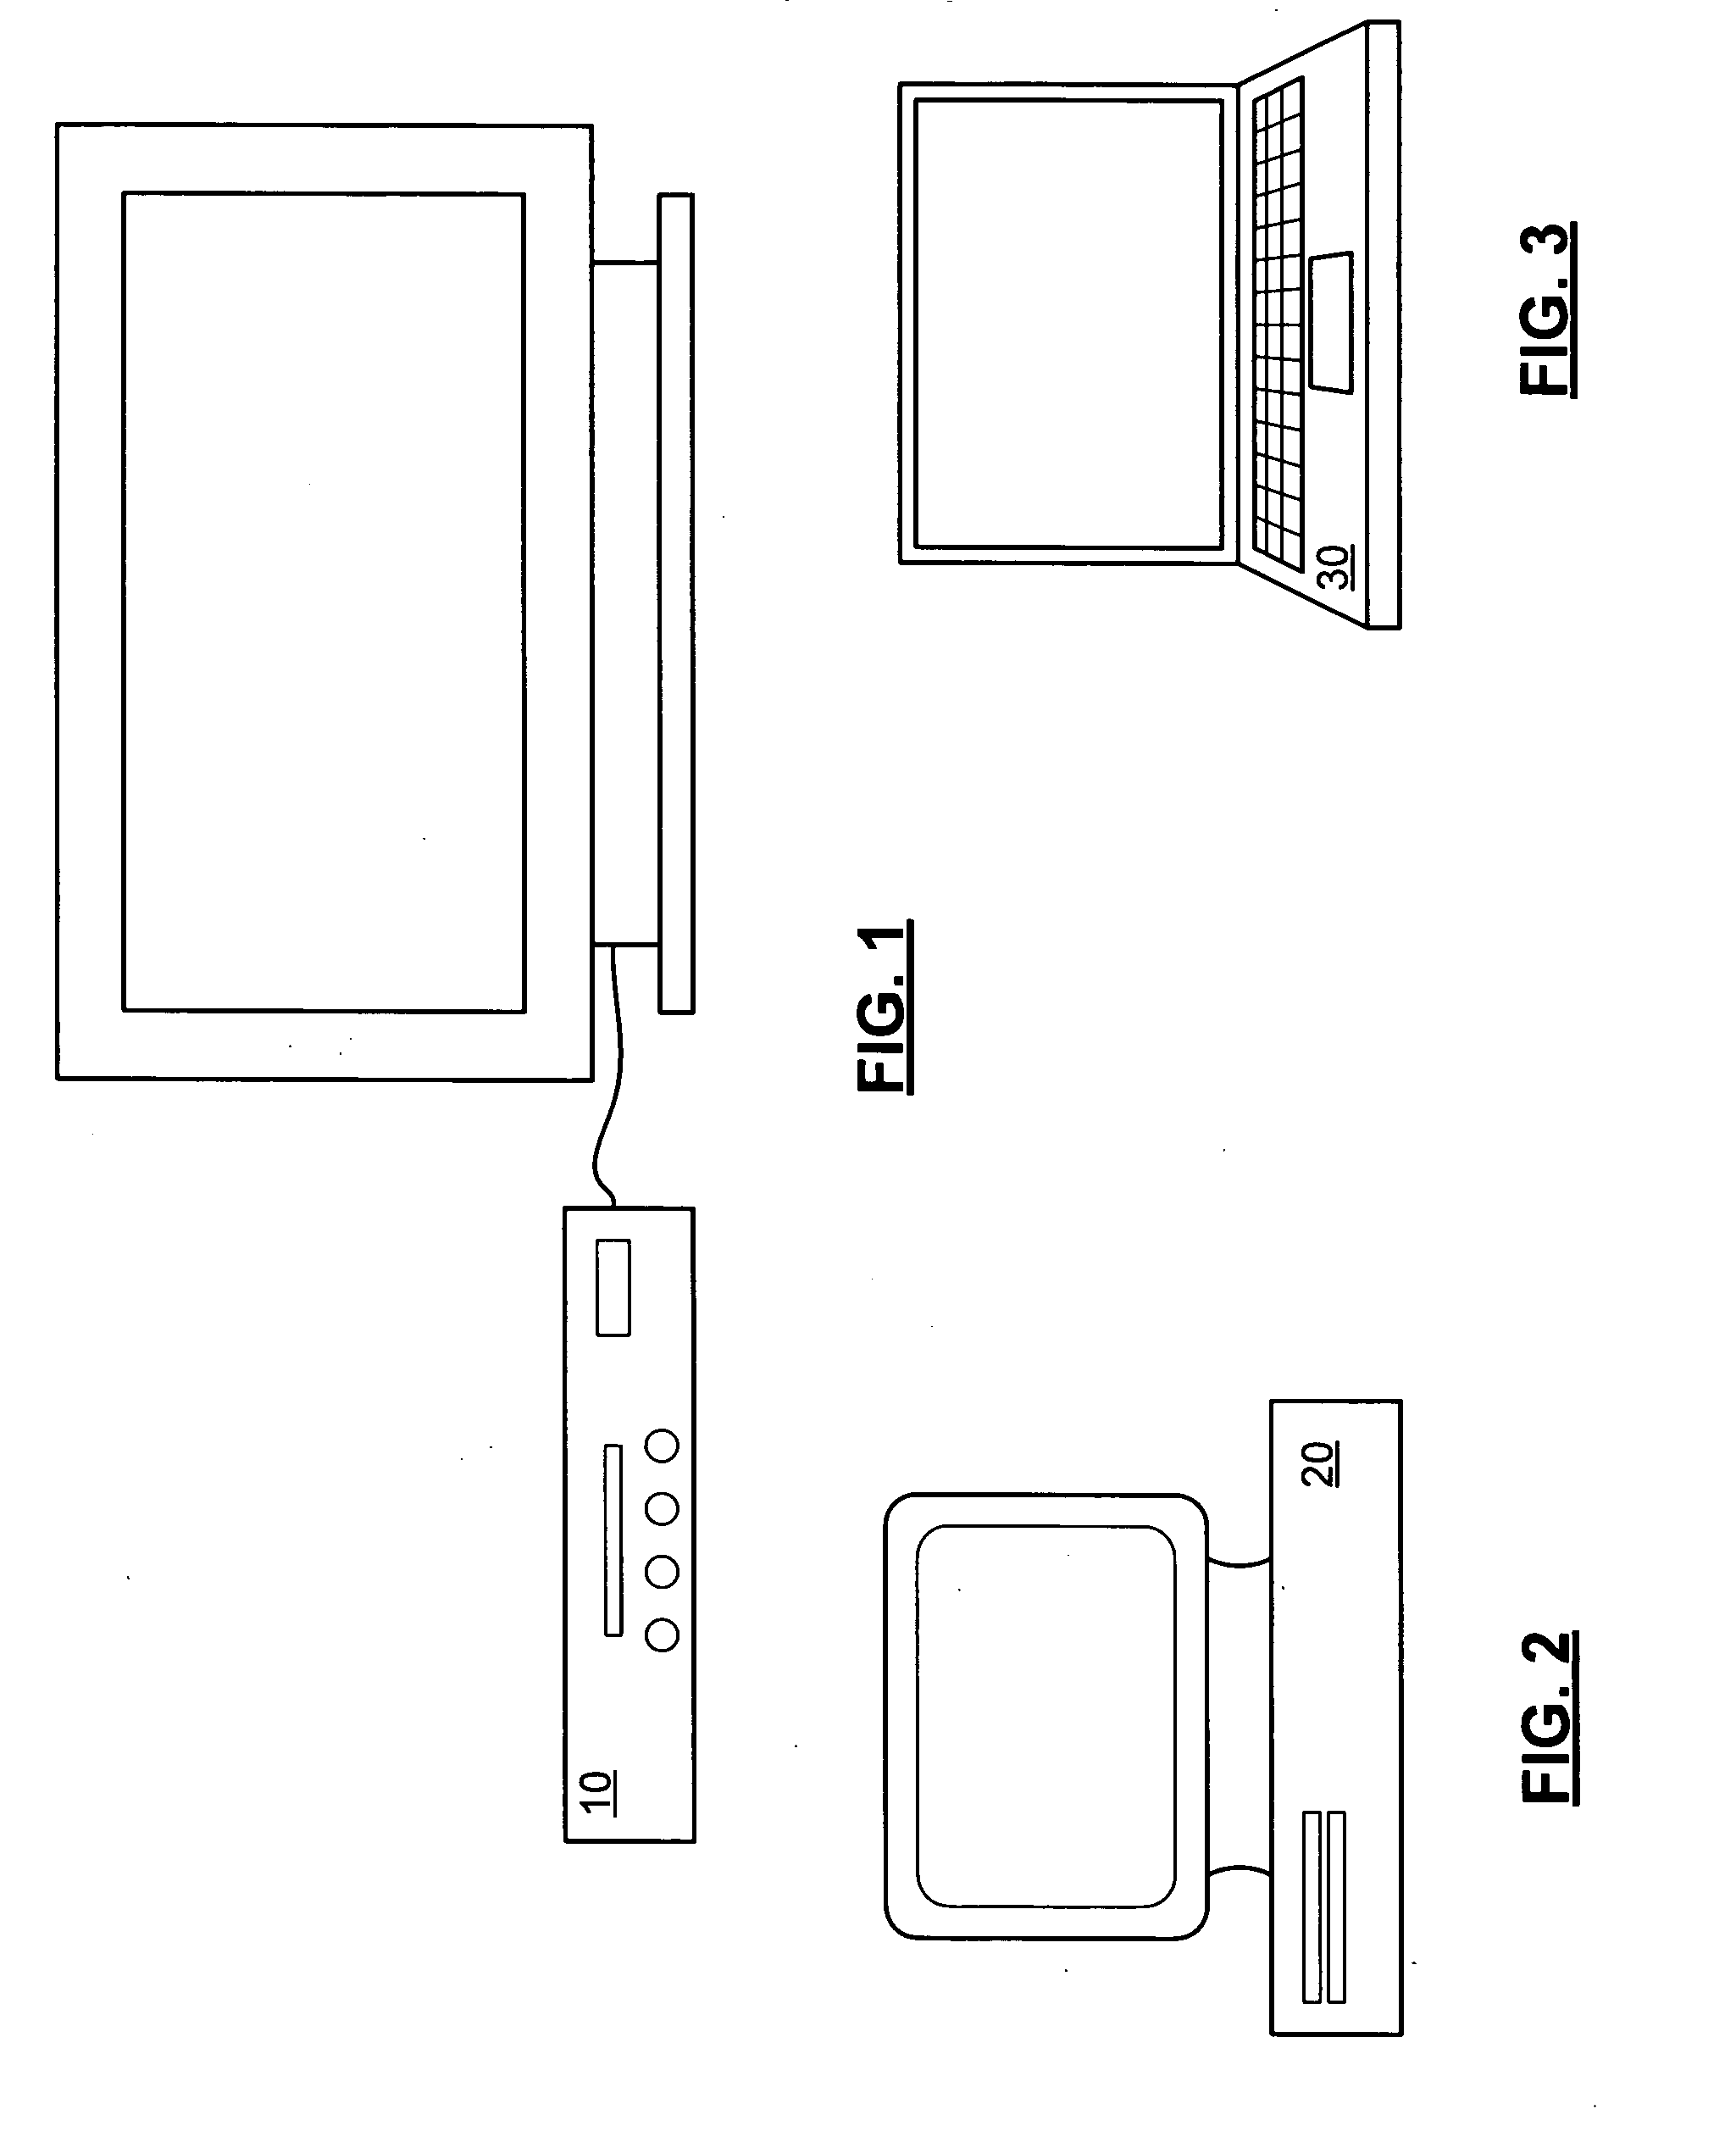 Motion refinement engine with selectable partitionings for use in video encoding and methods for use therewith